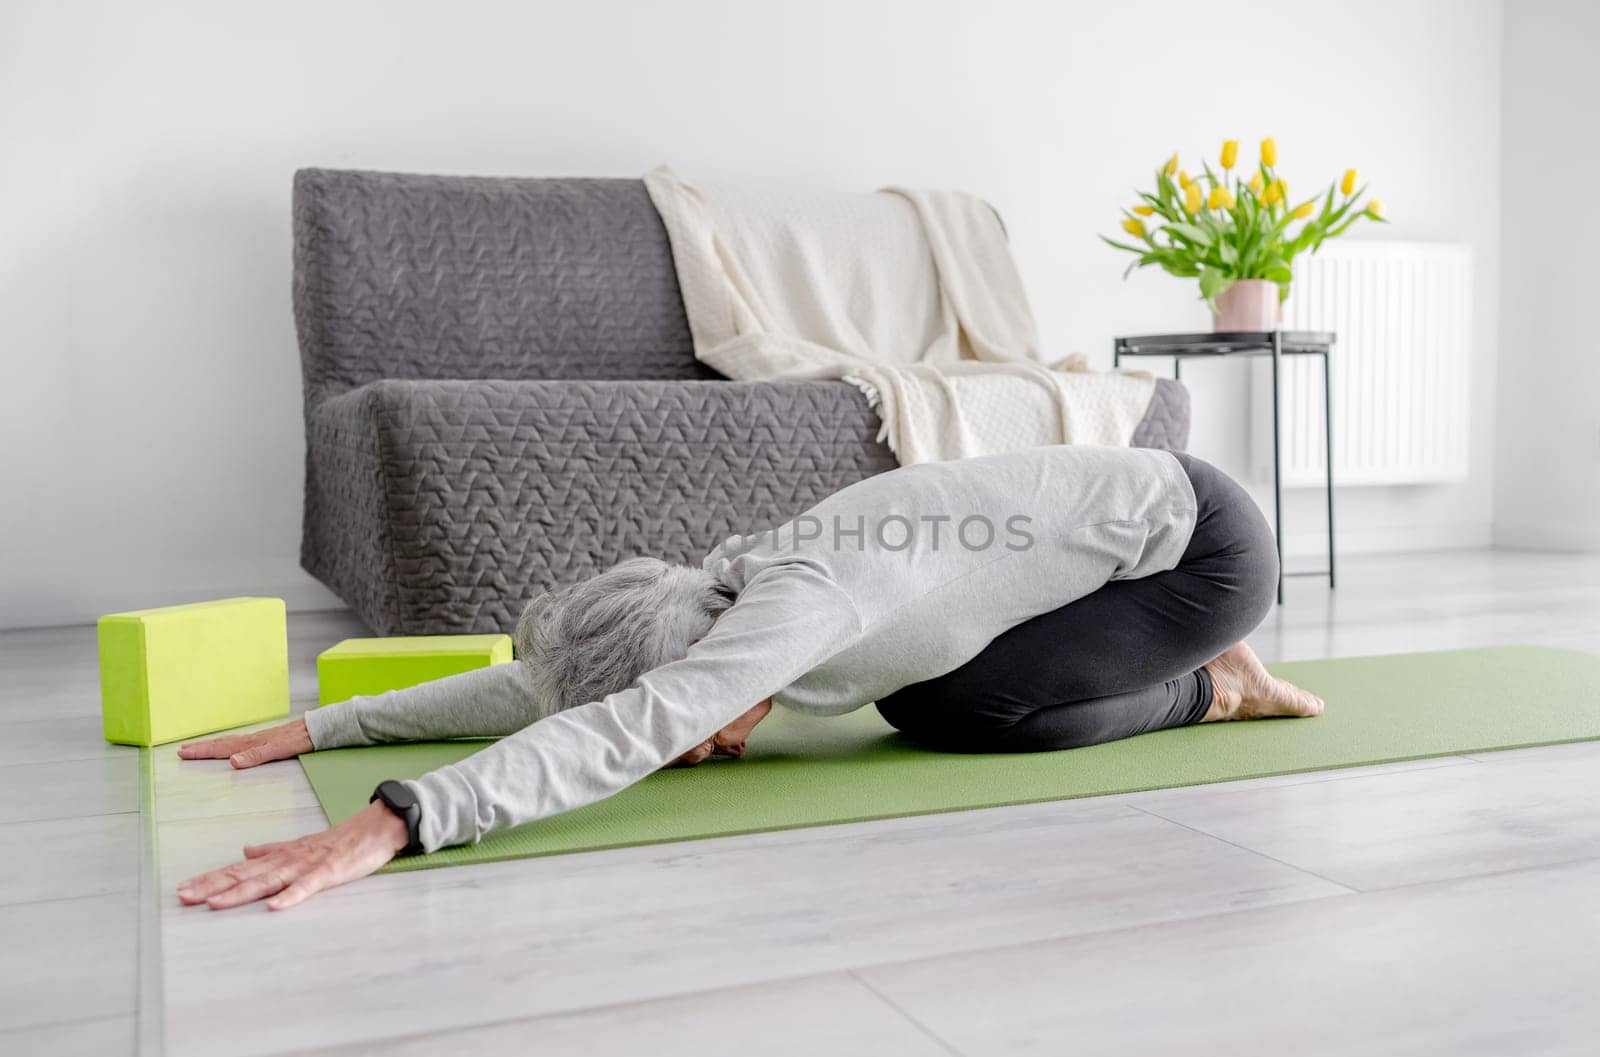 Grey-Haired Woman In baby Pose, Doing Yoga At Home On Floor by tan4ikk1